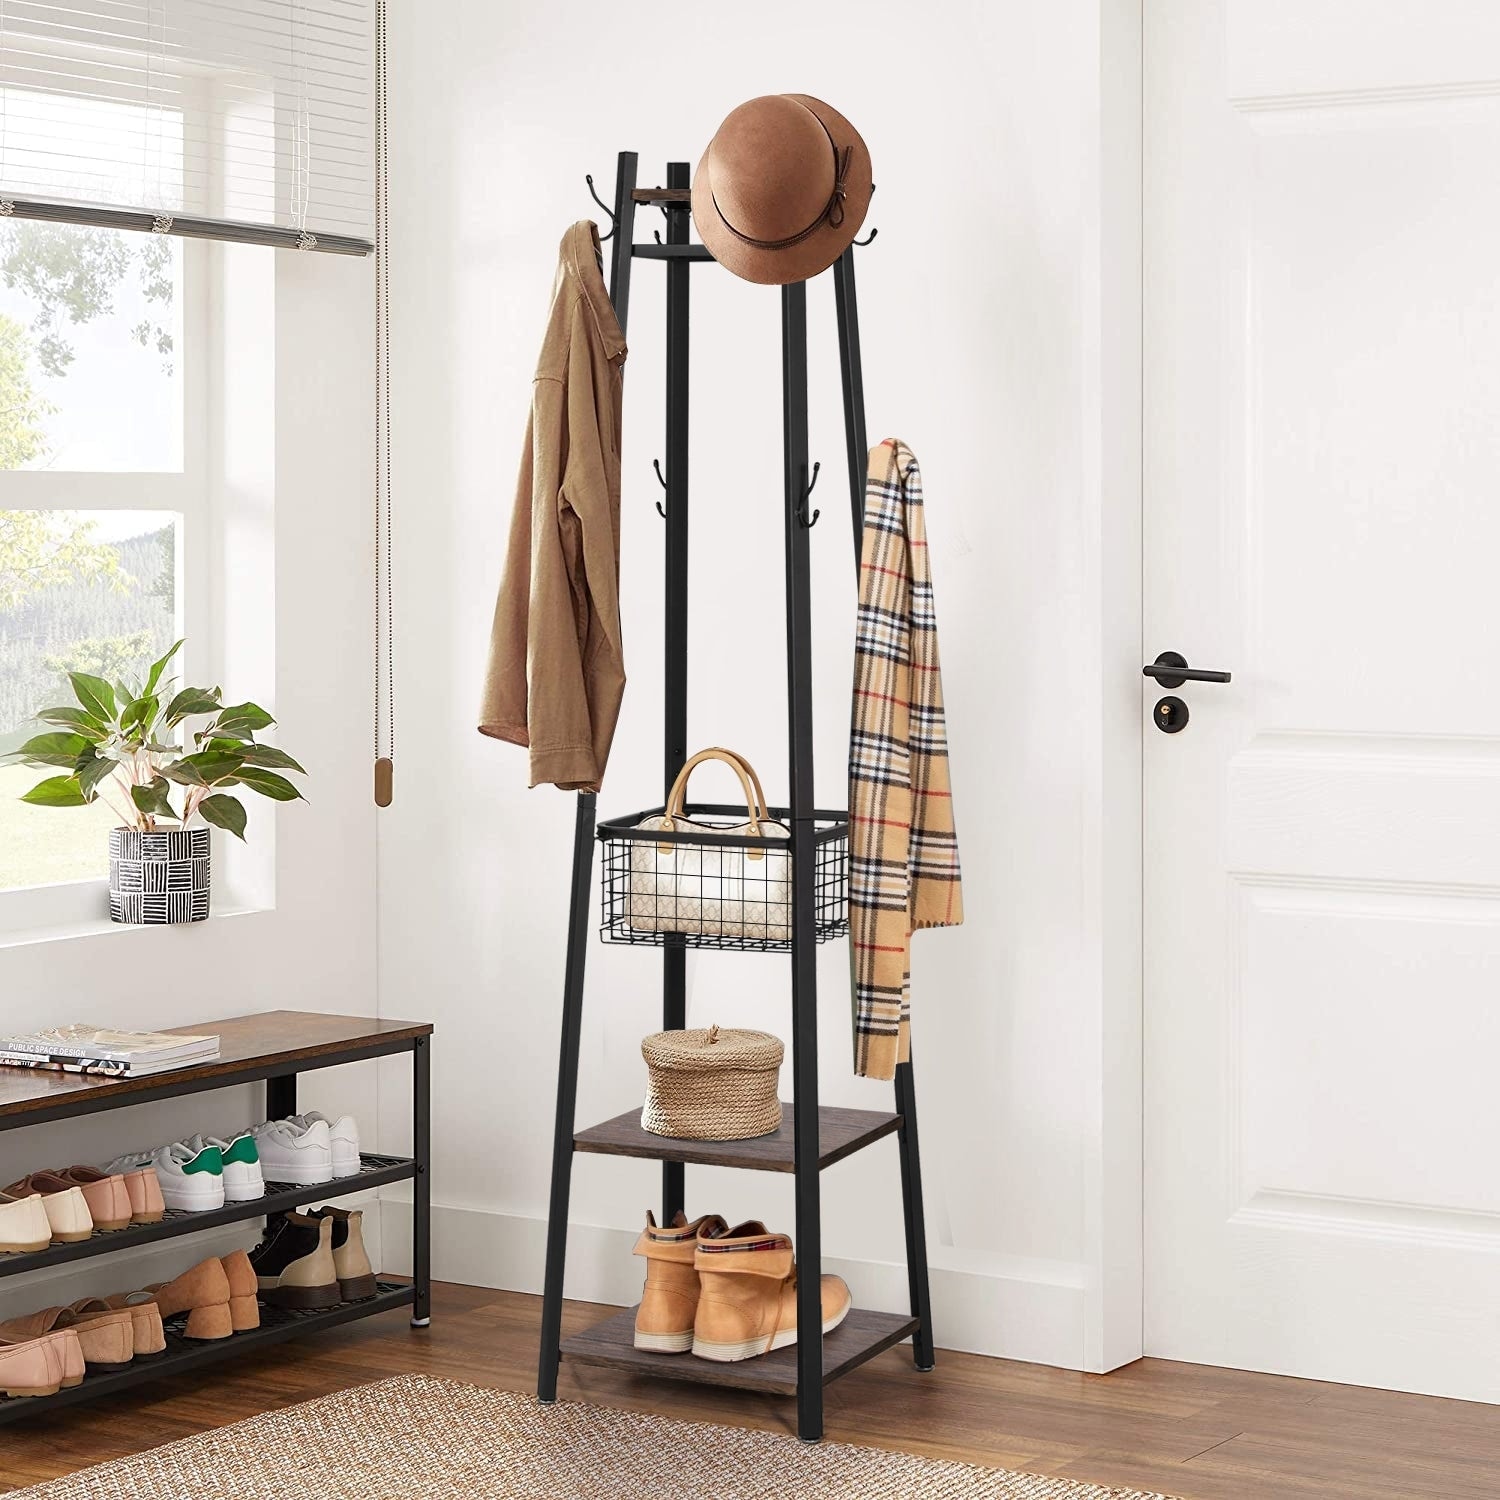 https://ak1.ostkcdn.com/images/products/is/images/direct/4eab8c9fbb518b96315683dd84ca22451be4c51f/Industrial-2-Shelves-Freestanding-Coat-Rack-with-Hooks-and-Storage-Basket.jpg